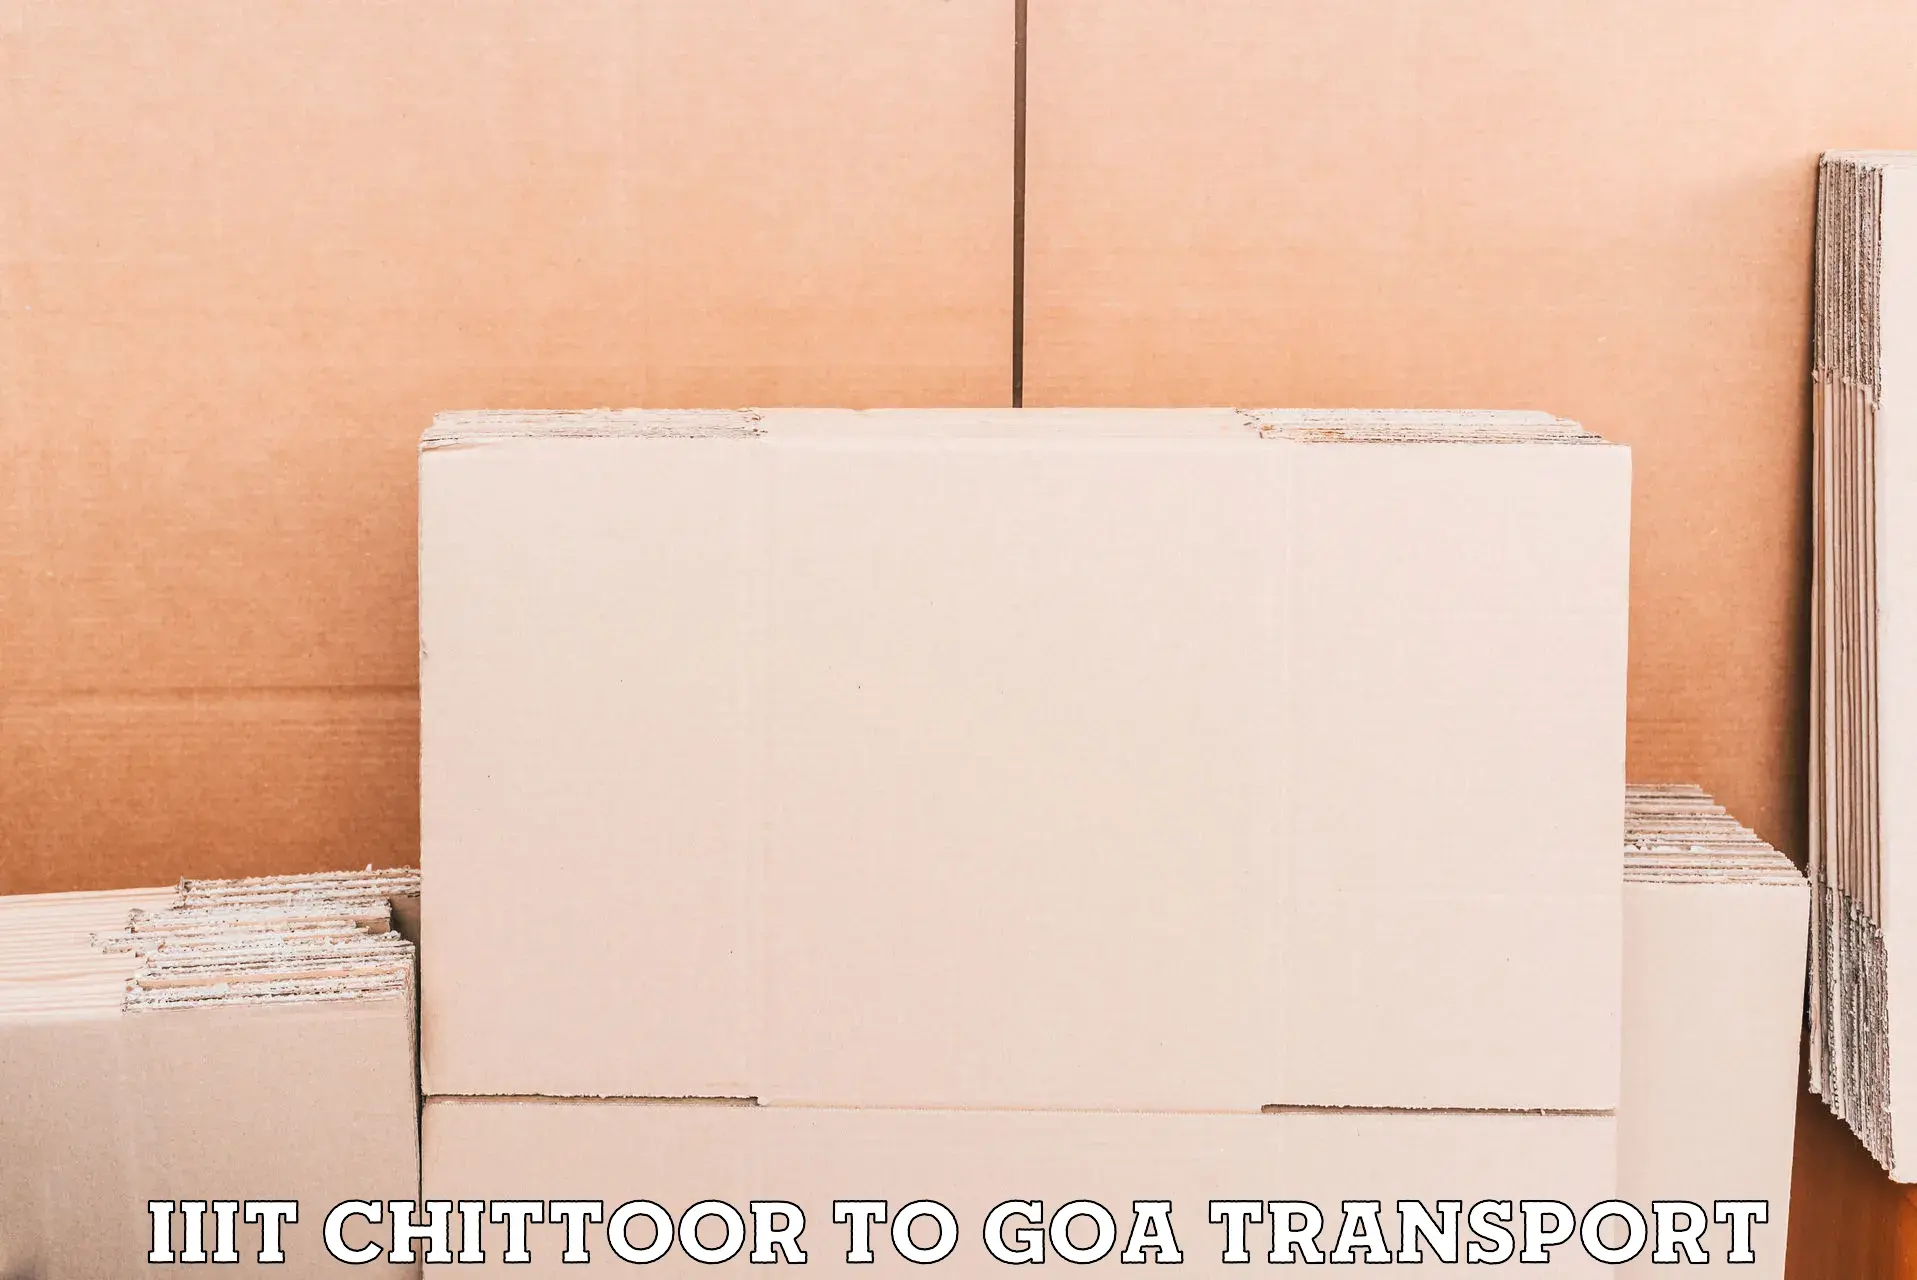 Commercial transport service IIIT Chittoor to Goa